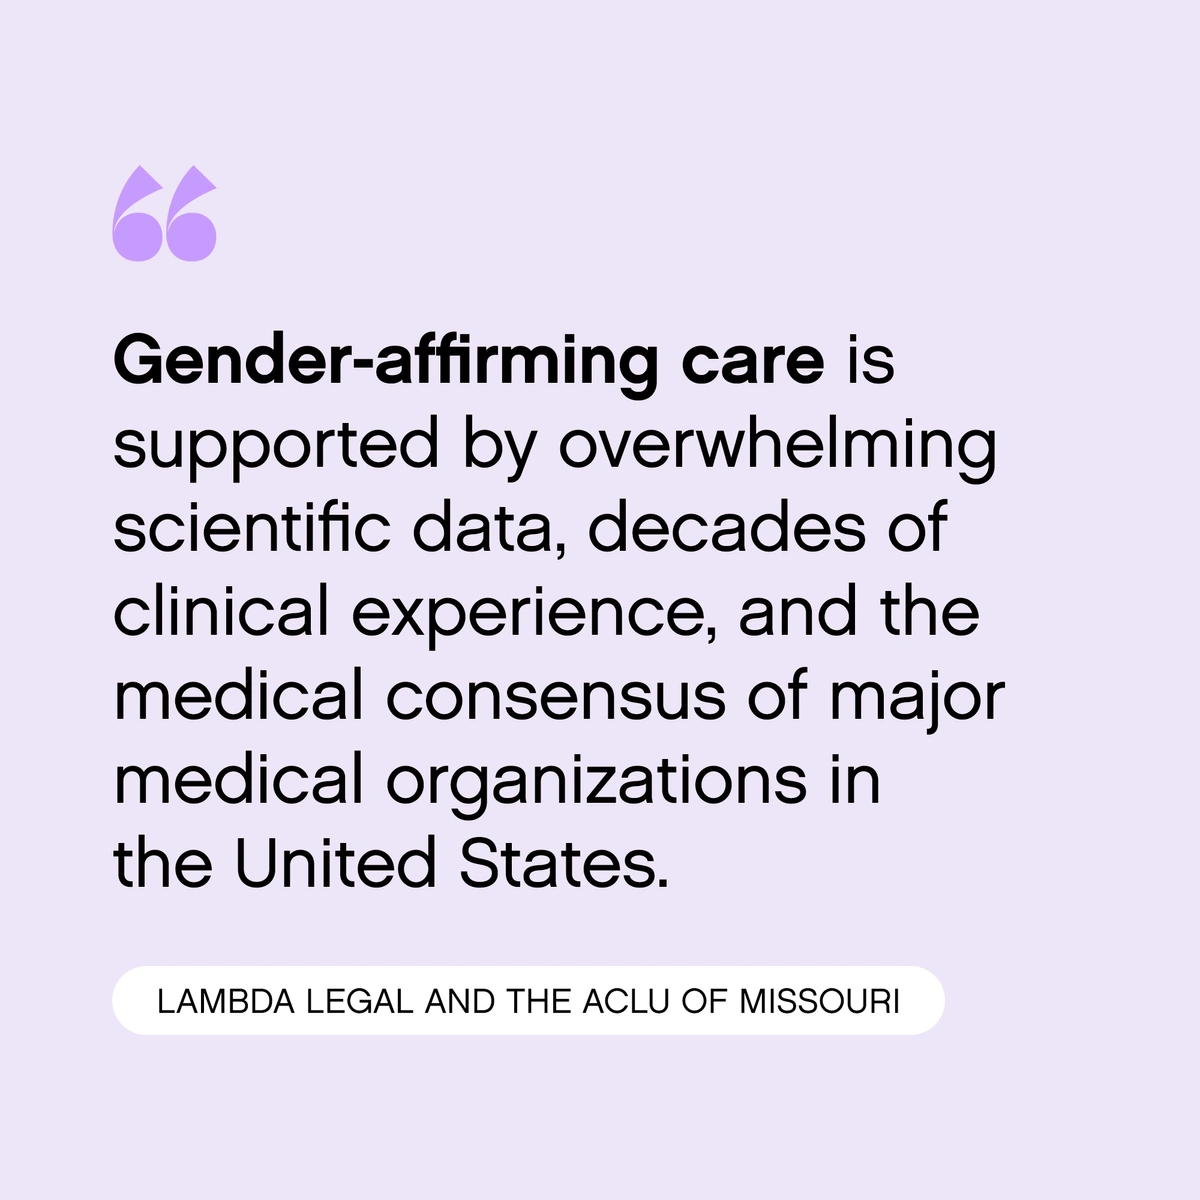 Quote from Lambda Legal and the ACLU of Missouri: "Gender-affirming care is supported by overwhelming scientific data, decades of clinical experience, and the medical consensus of major medical organizations in the United States.”